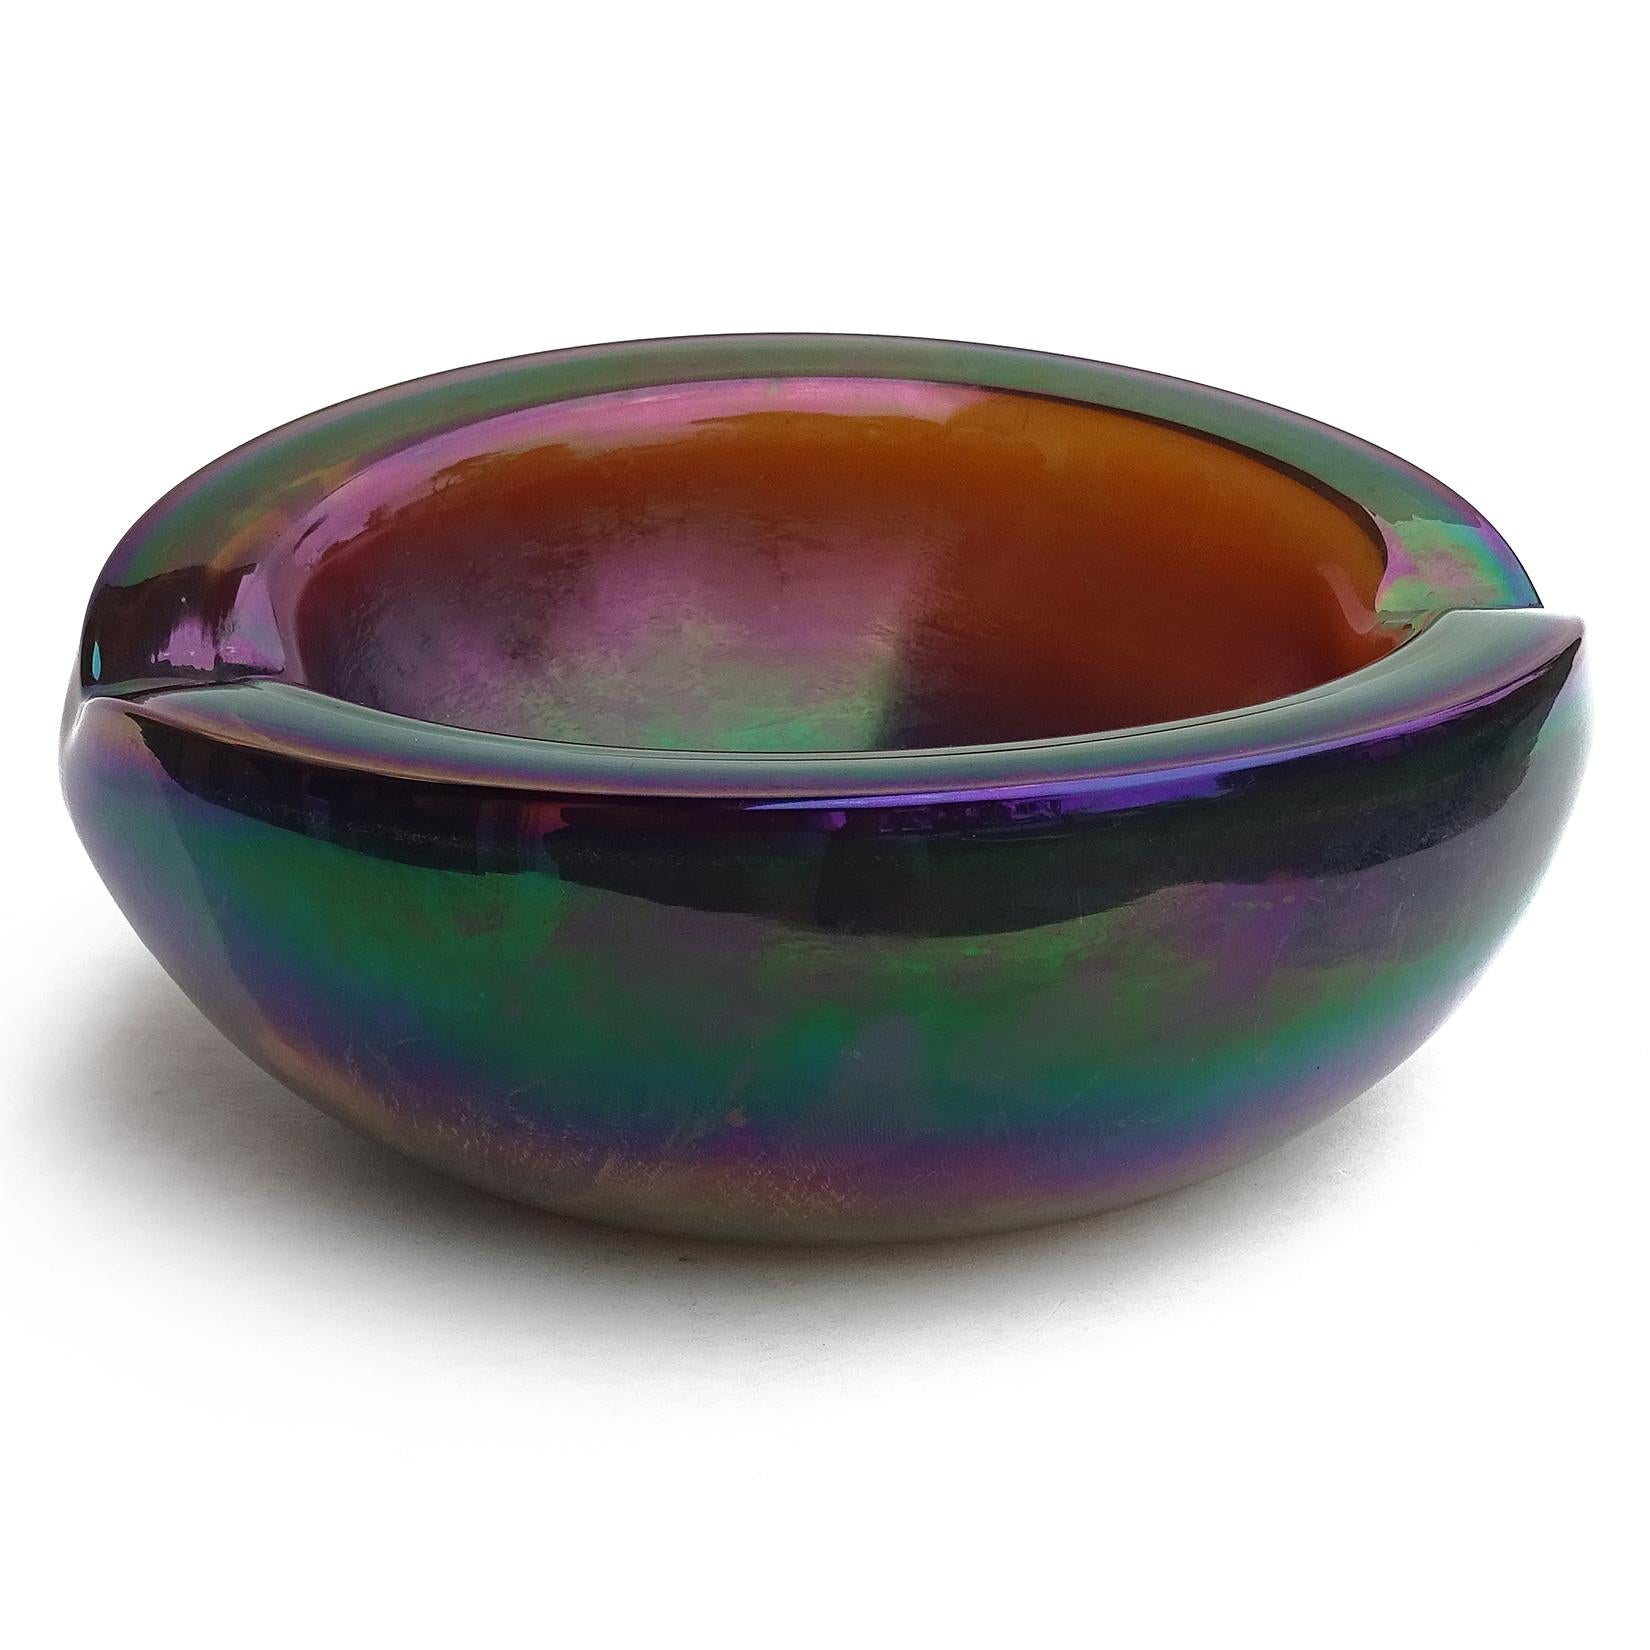 Beautiful and unusual Murano hand blown dark high gloss iridescent / aurene Italian art glass bowl. The piece is made with thick glass, and shows a rainbow of colors when the light hits. It has 2 indents on the rim, so could be used as an ashtray.